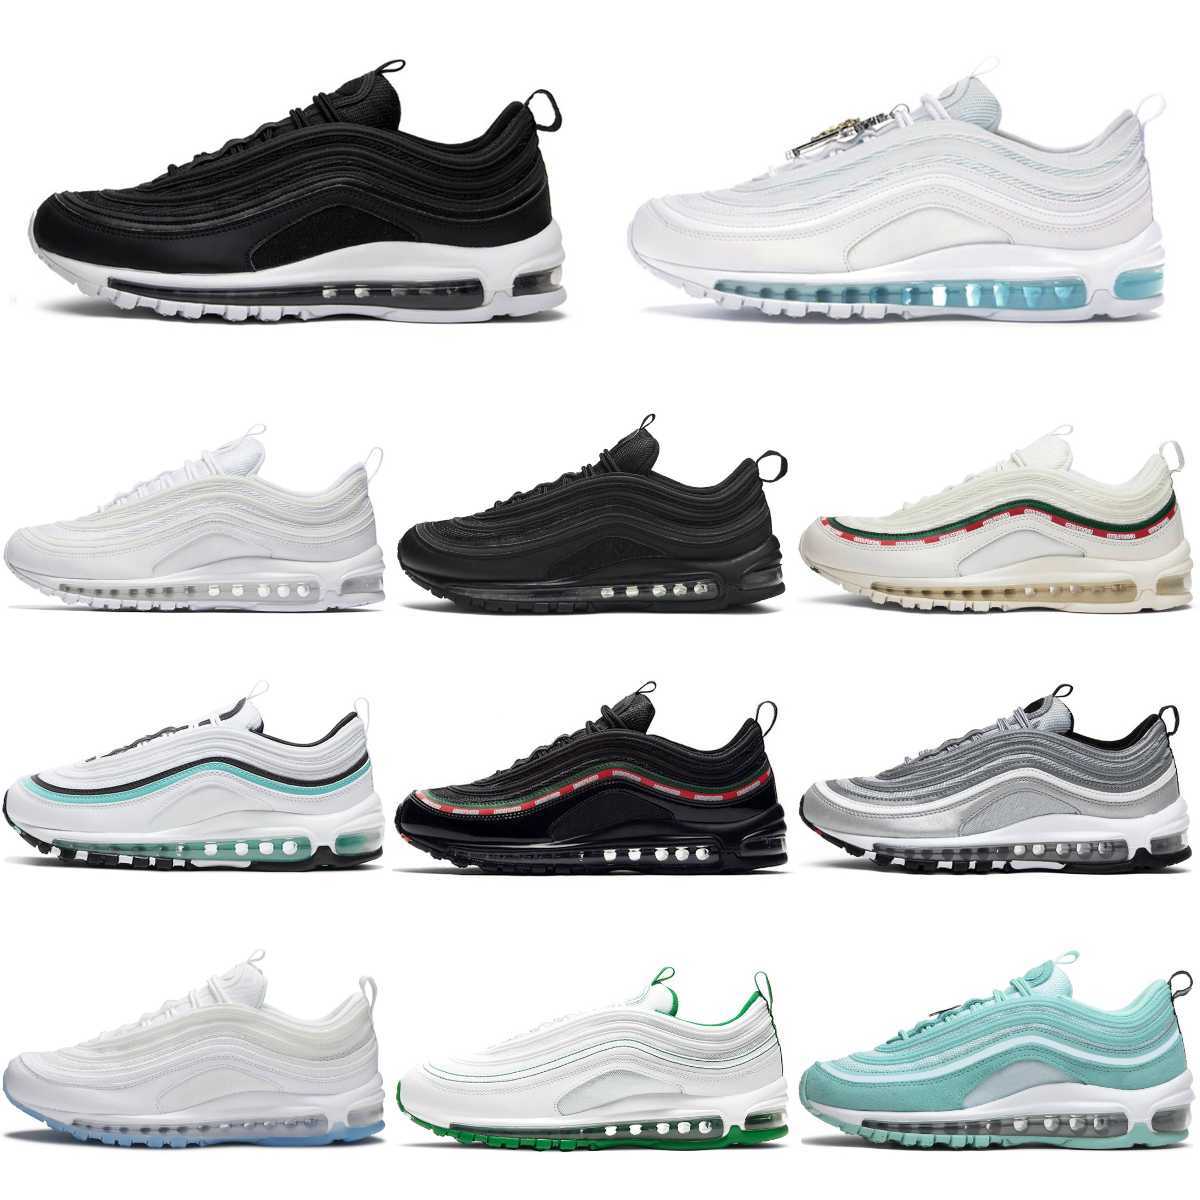 

2023 Classic Max 97 Mens Sports Shoes Vapores Jesus Undefeated Black Summit Air 97s Triple White Golf NRG Lucky And Good MSCHF X INRI Celestial Women Trainer Sneakers, Please contact us